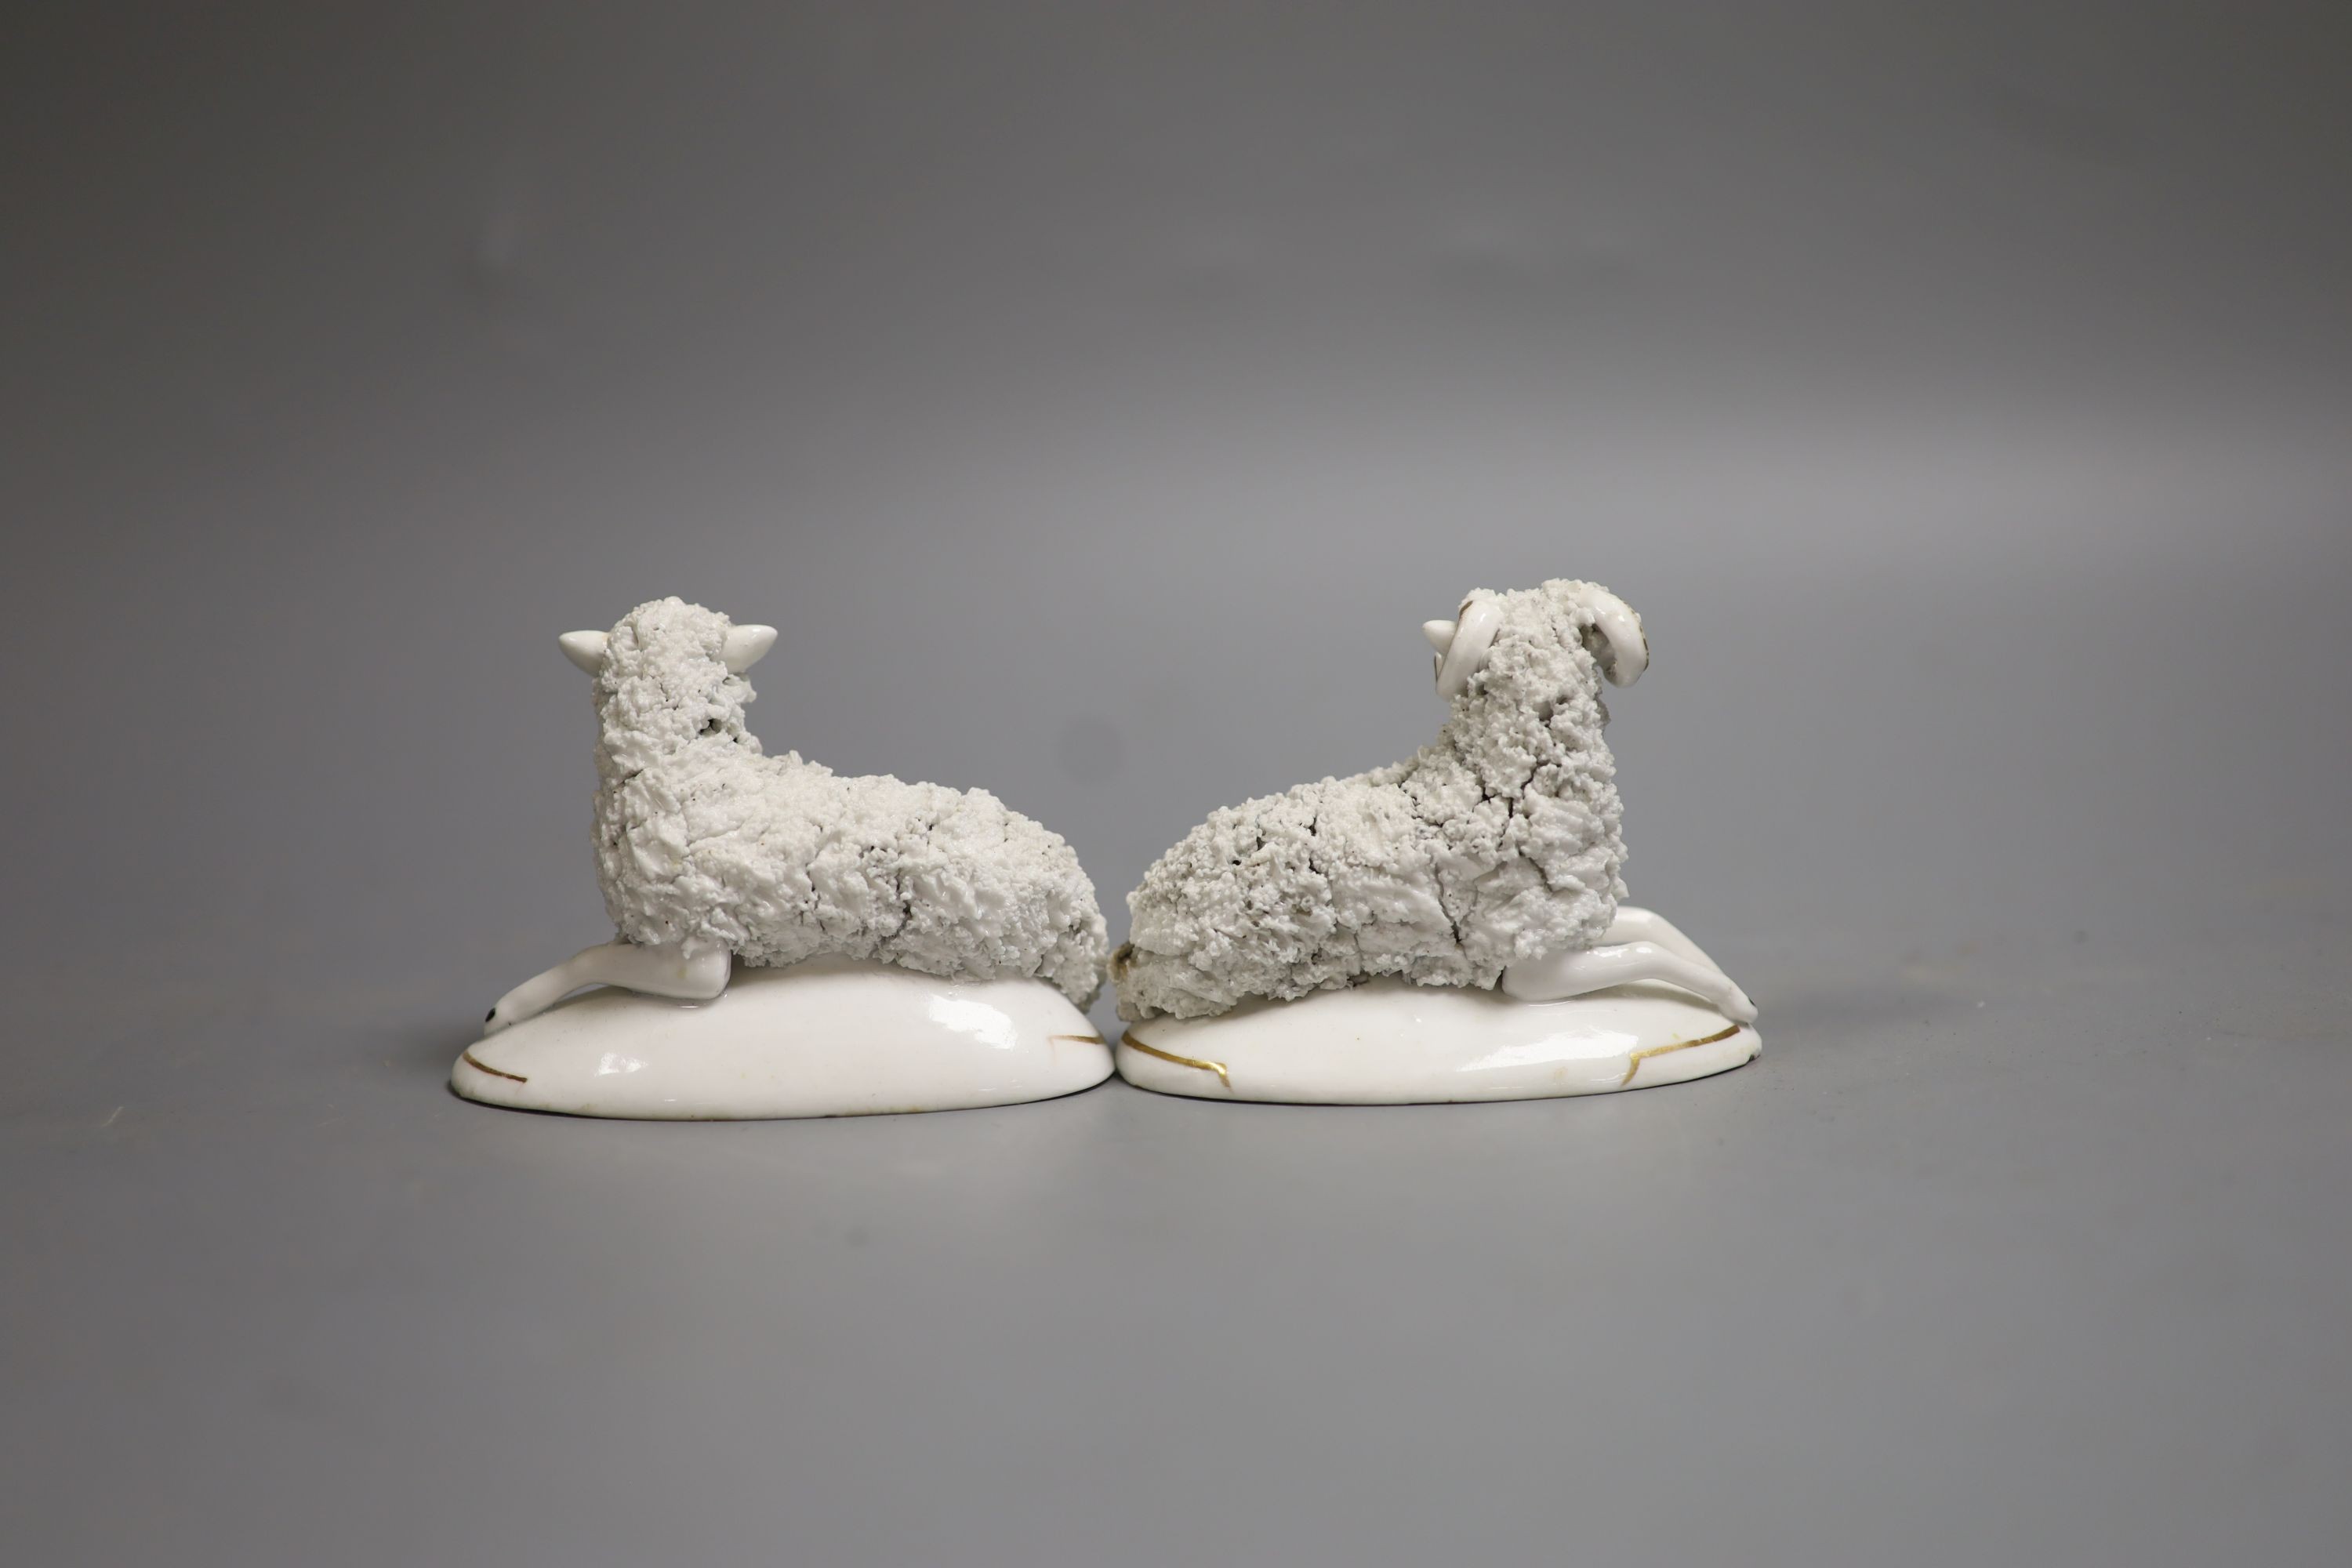 A pair of Staffordshire porcelain models of a recumbent ram and ewe, c.1830-50, 9.6 cm - 9.9 cm long